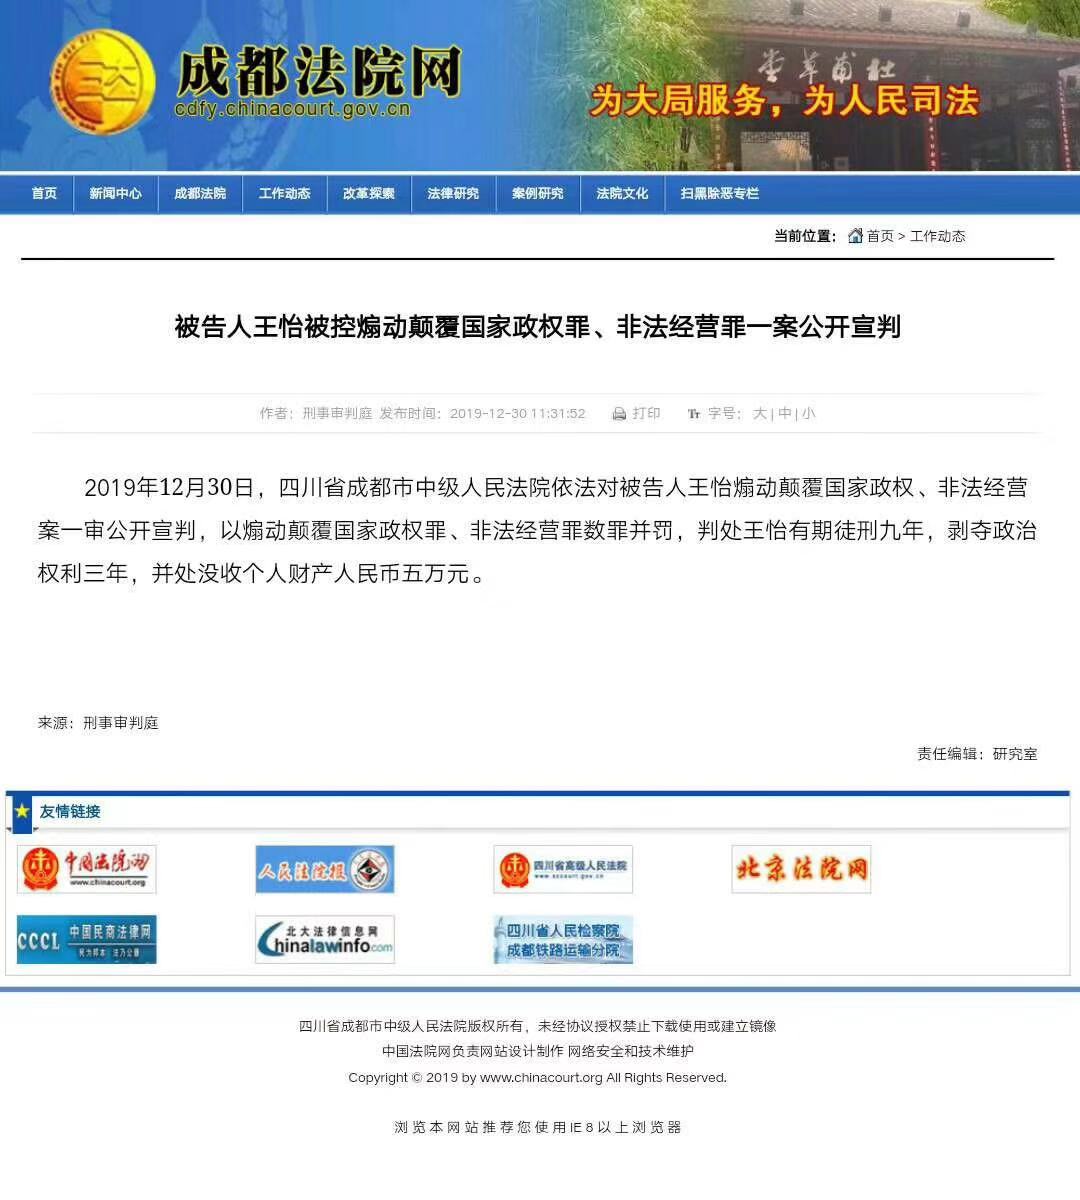 The announcement of the punishment for Pastor Wang Yi was released on Dec. 30, 2019. 